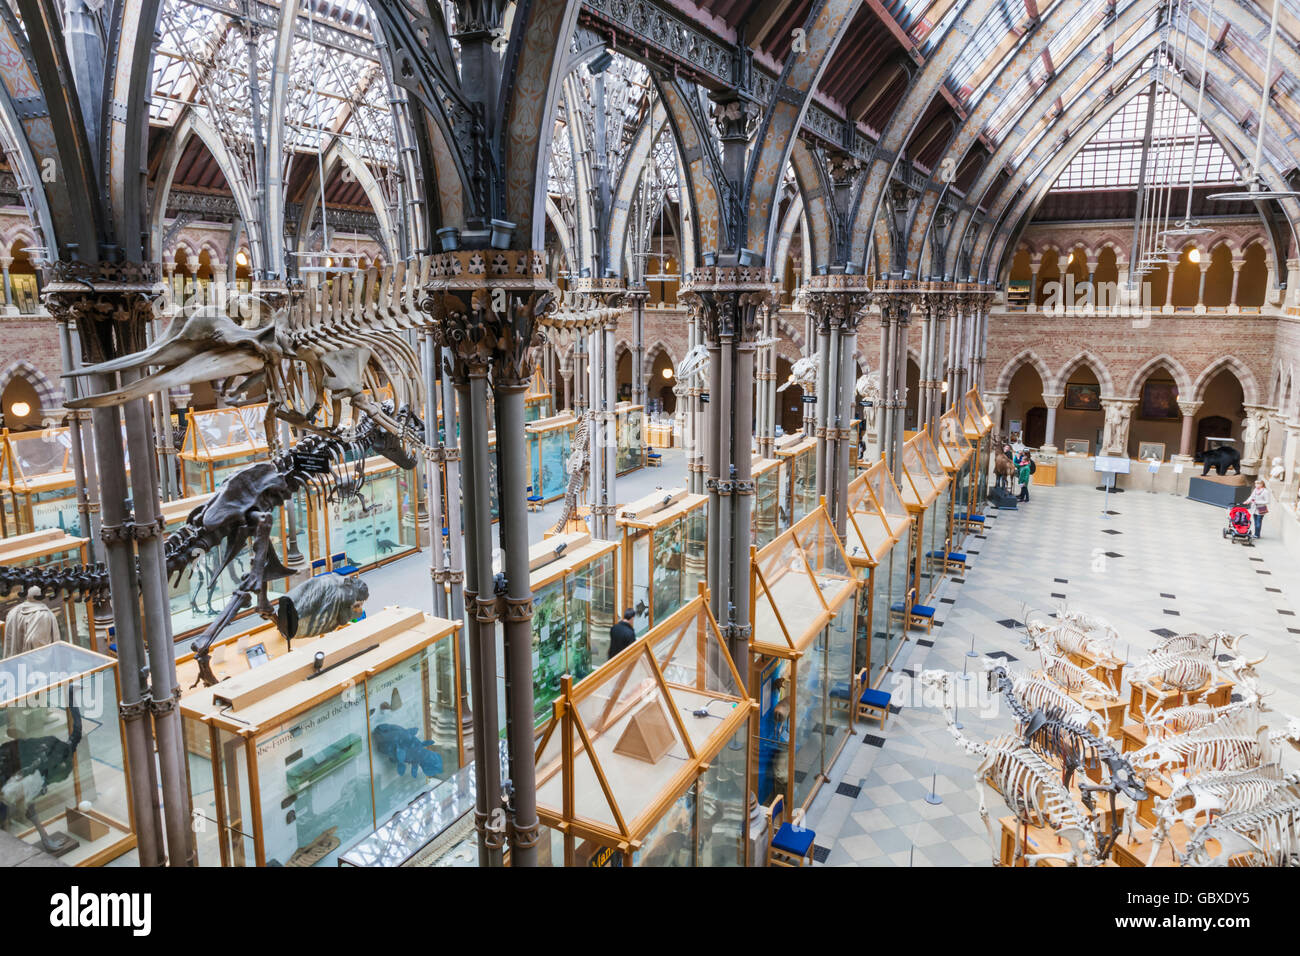 England, Oxfordshire, Oxford, Museum of Natural History, Innenansicht Stockfoto